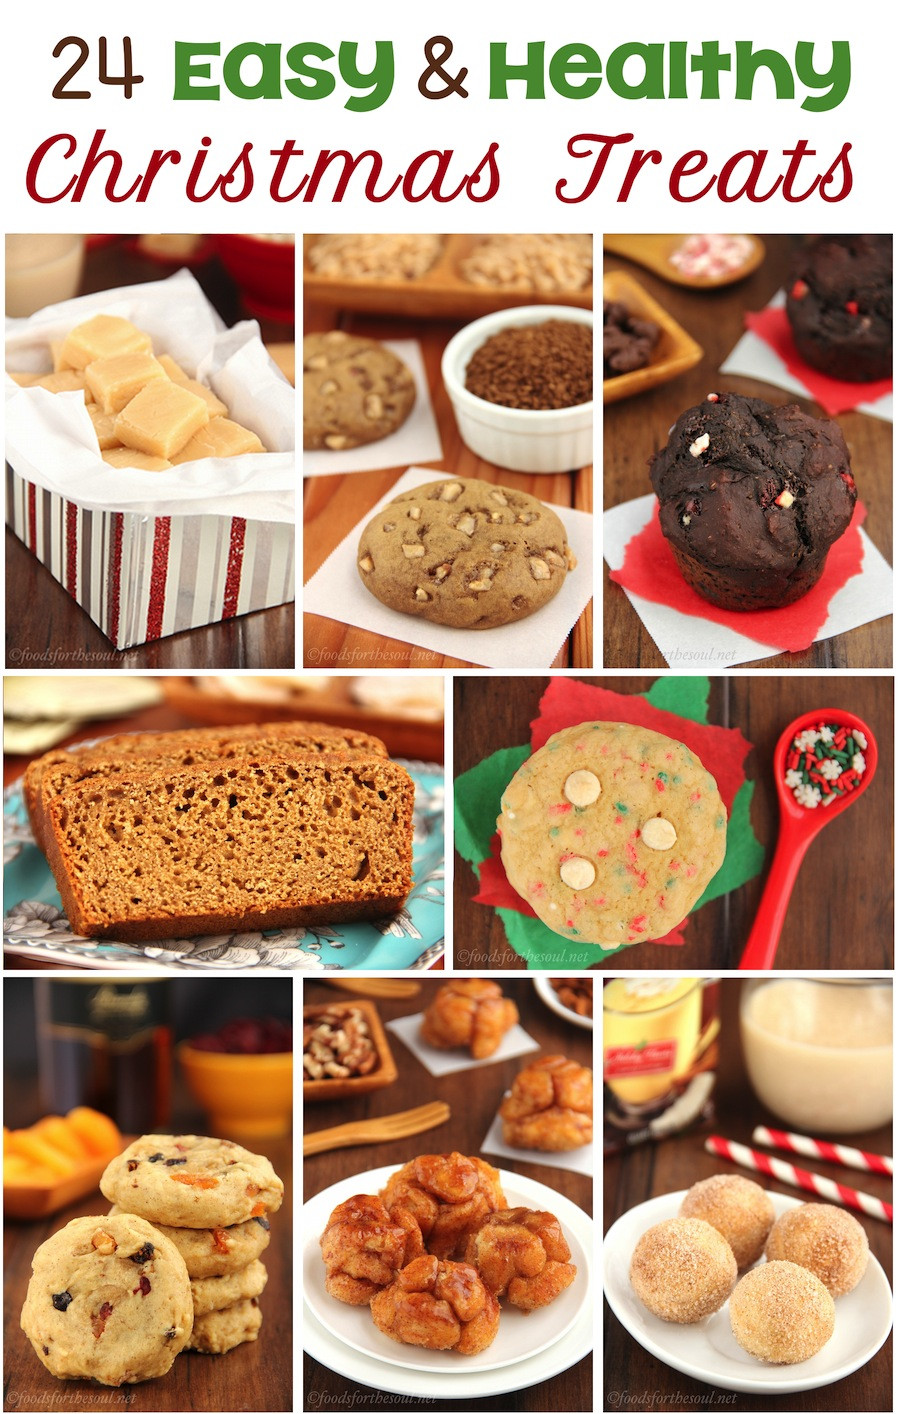 Healthy Christmas Baking the top 20 Ideas About 24 Easy &amp; Healthy Christmas Treats